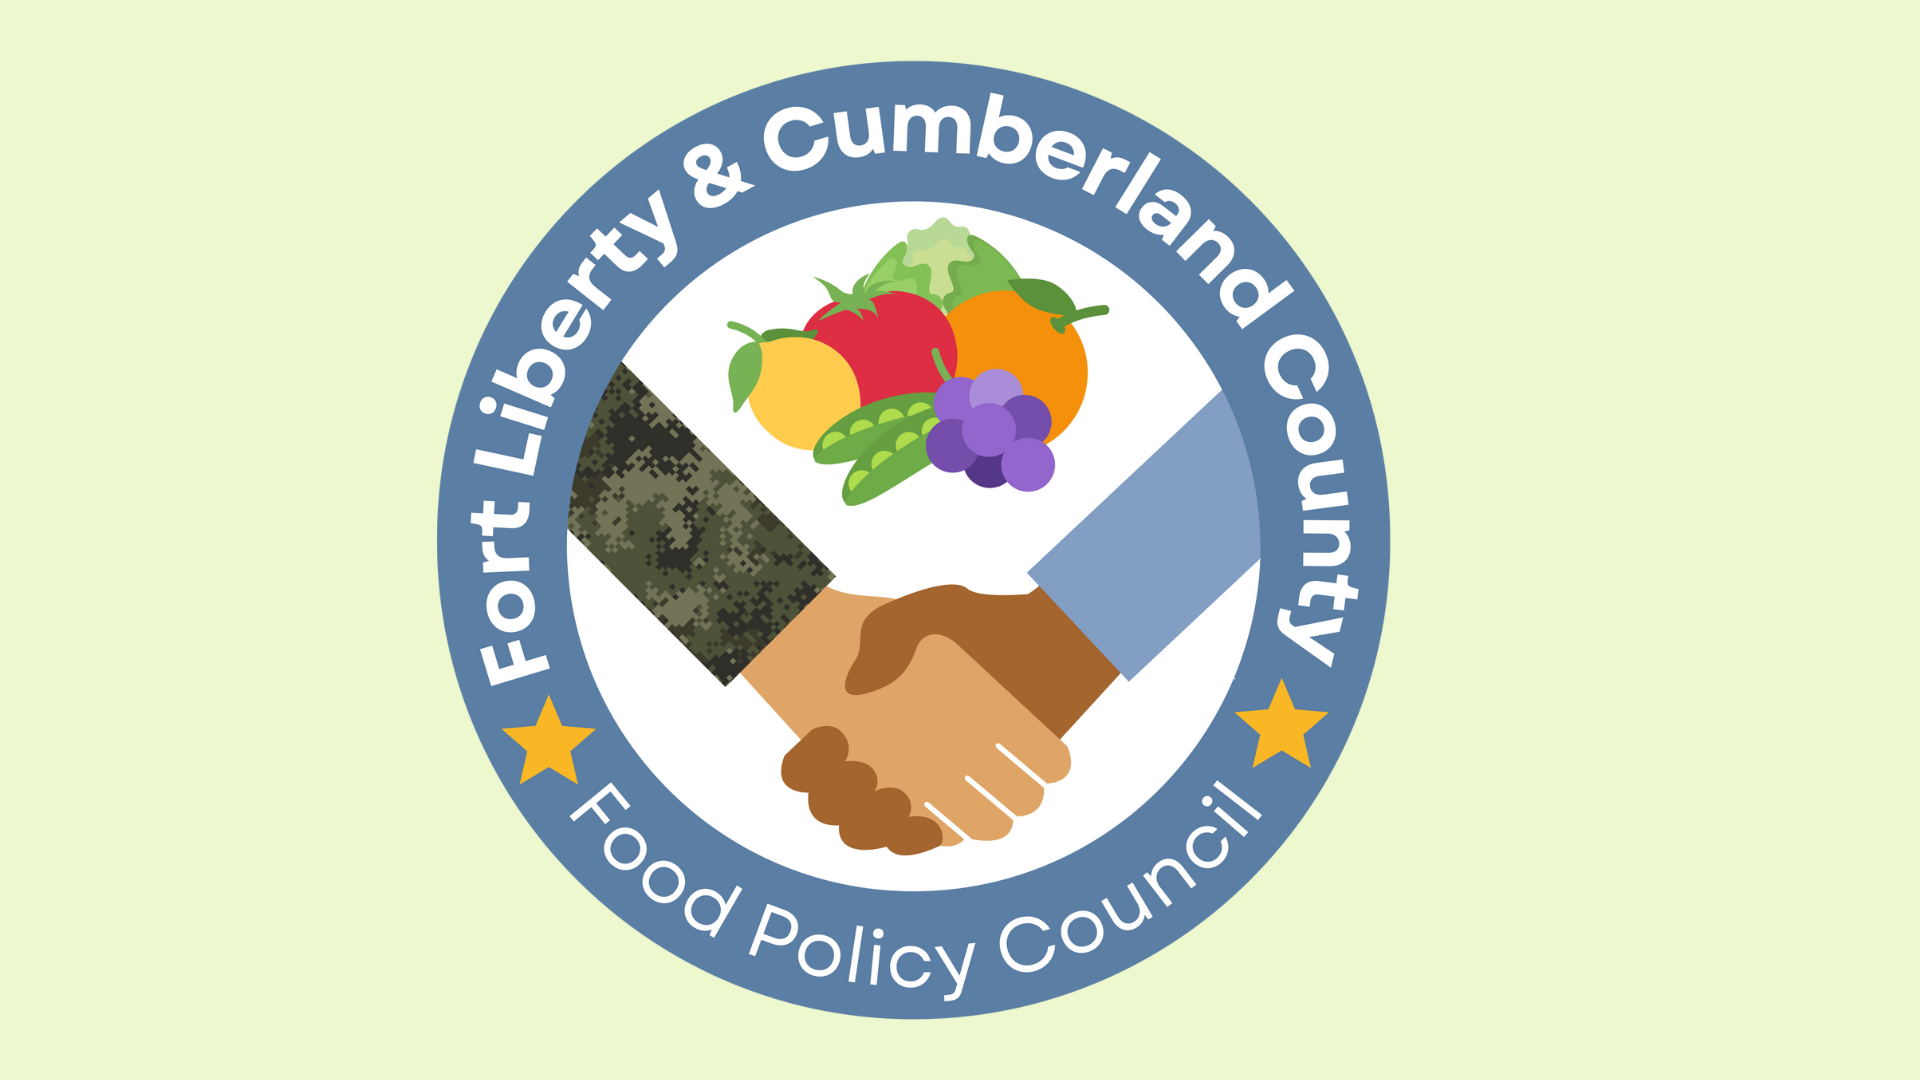 shaking hands with fort liberty and cumberland county food policy council letters arranged in a circle